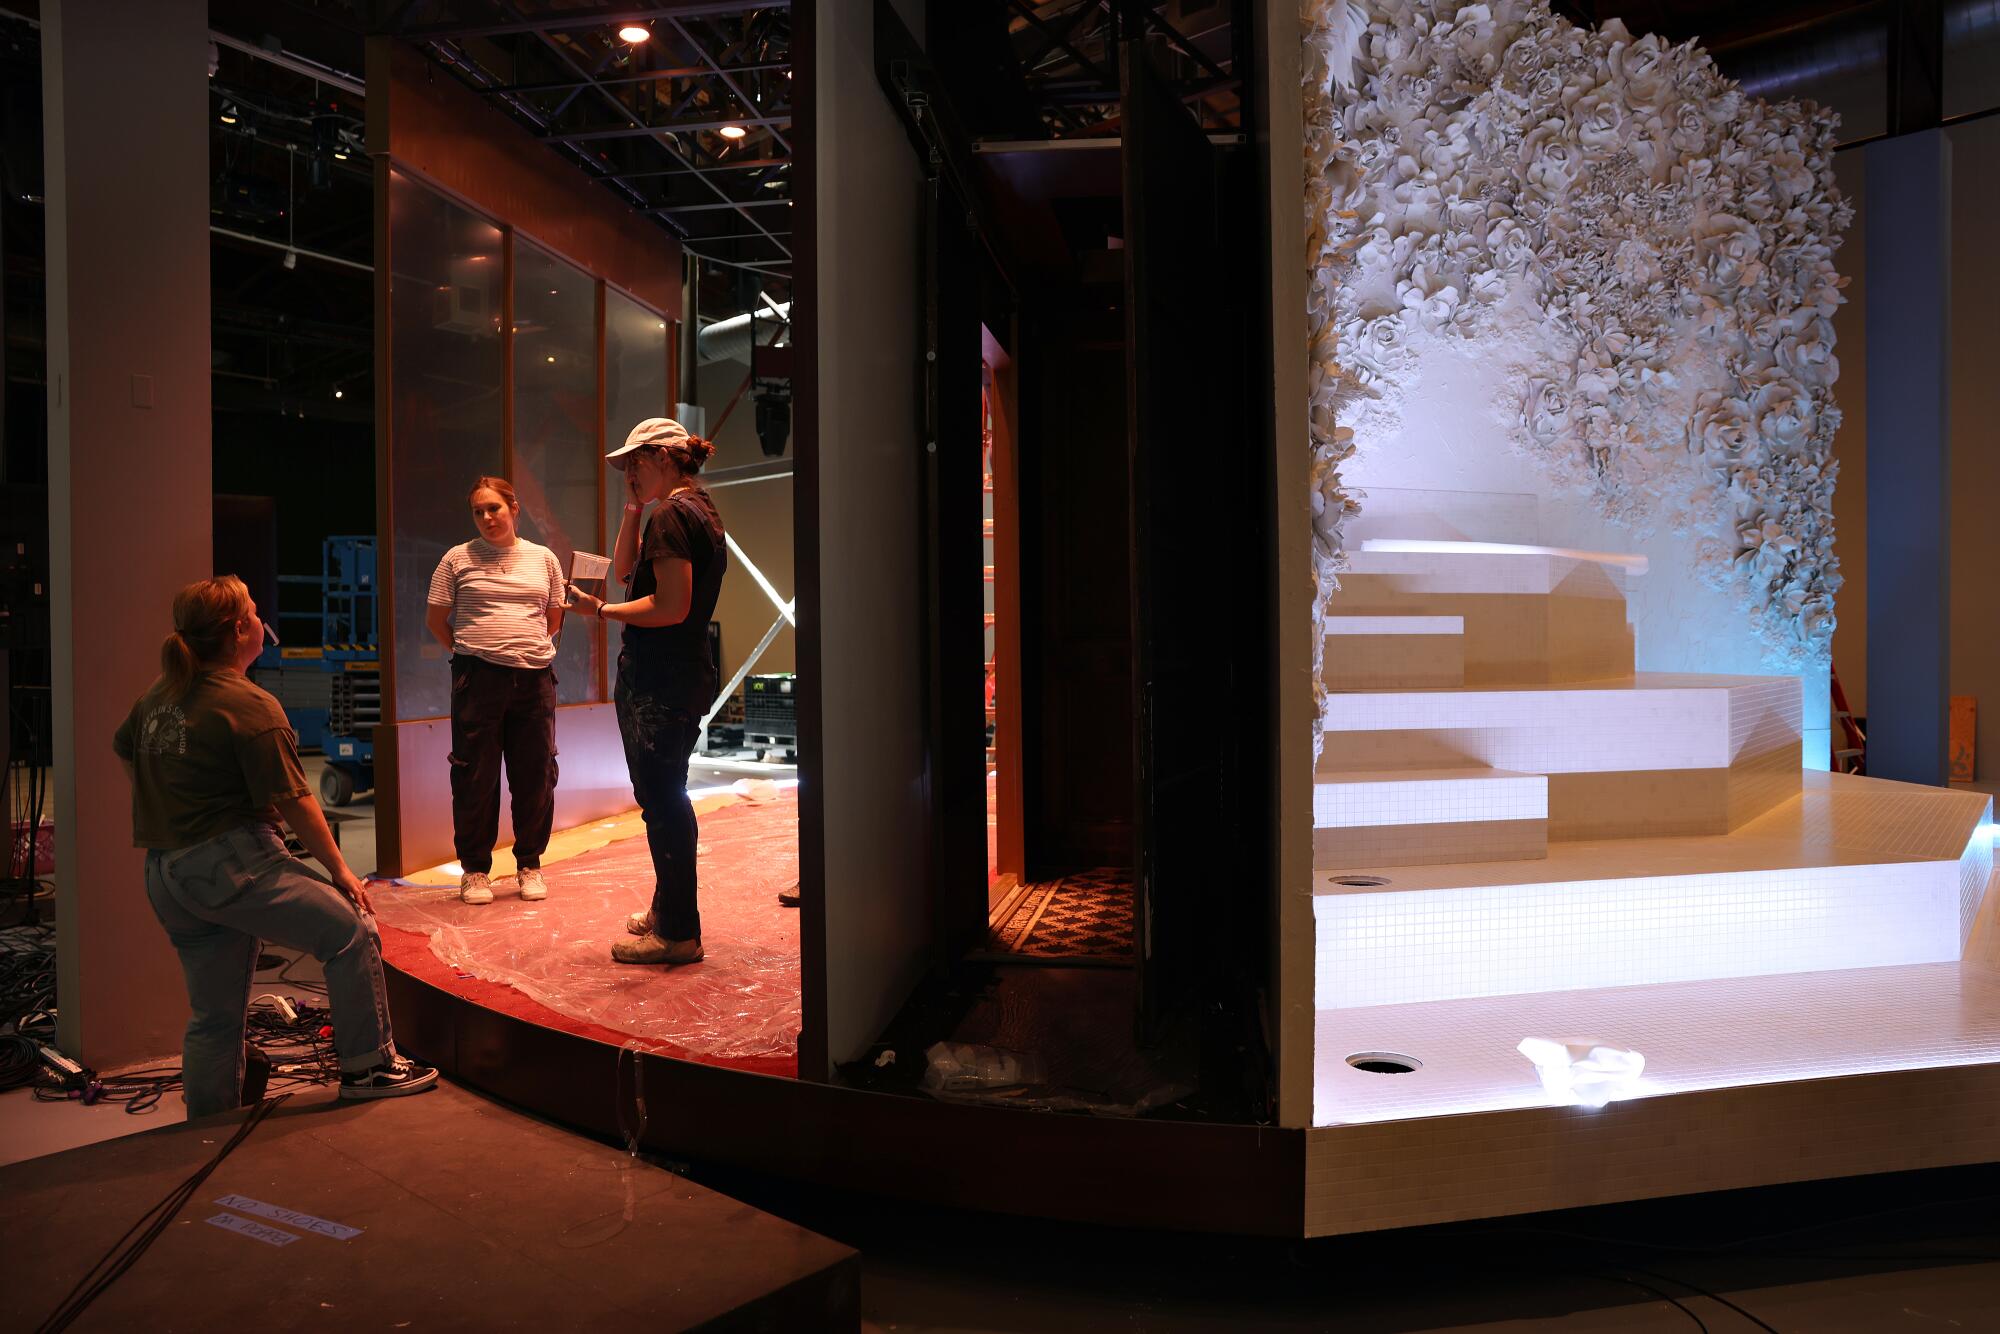 Crew members stand on "The Comet / Poppea's" double-sided rotating stage.